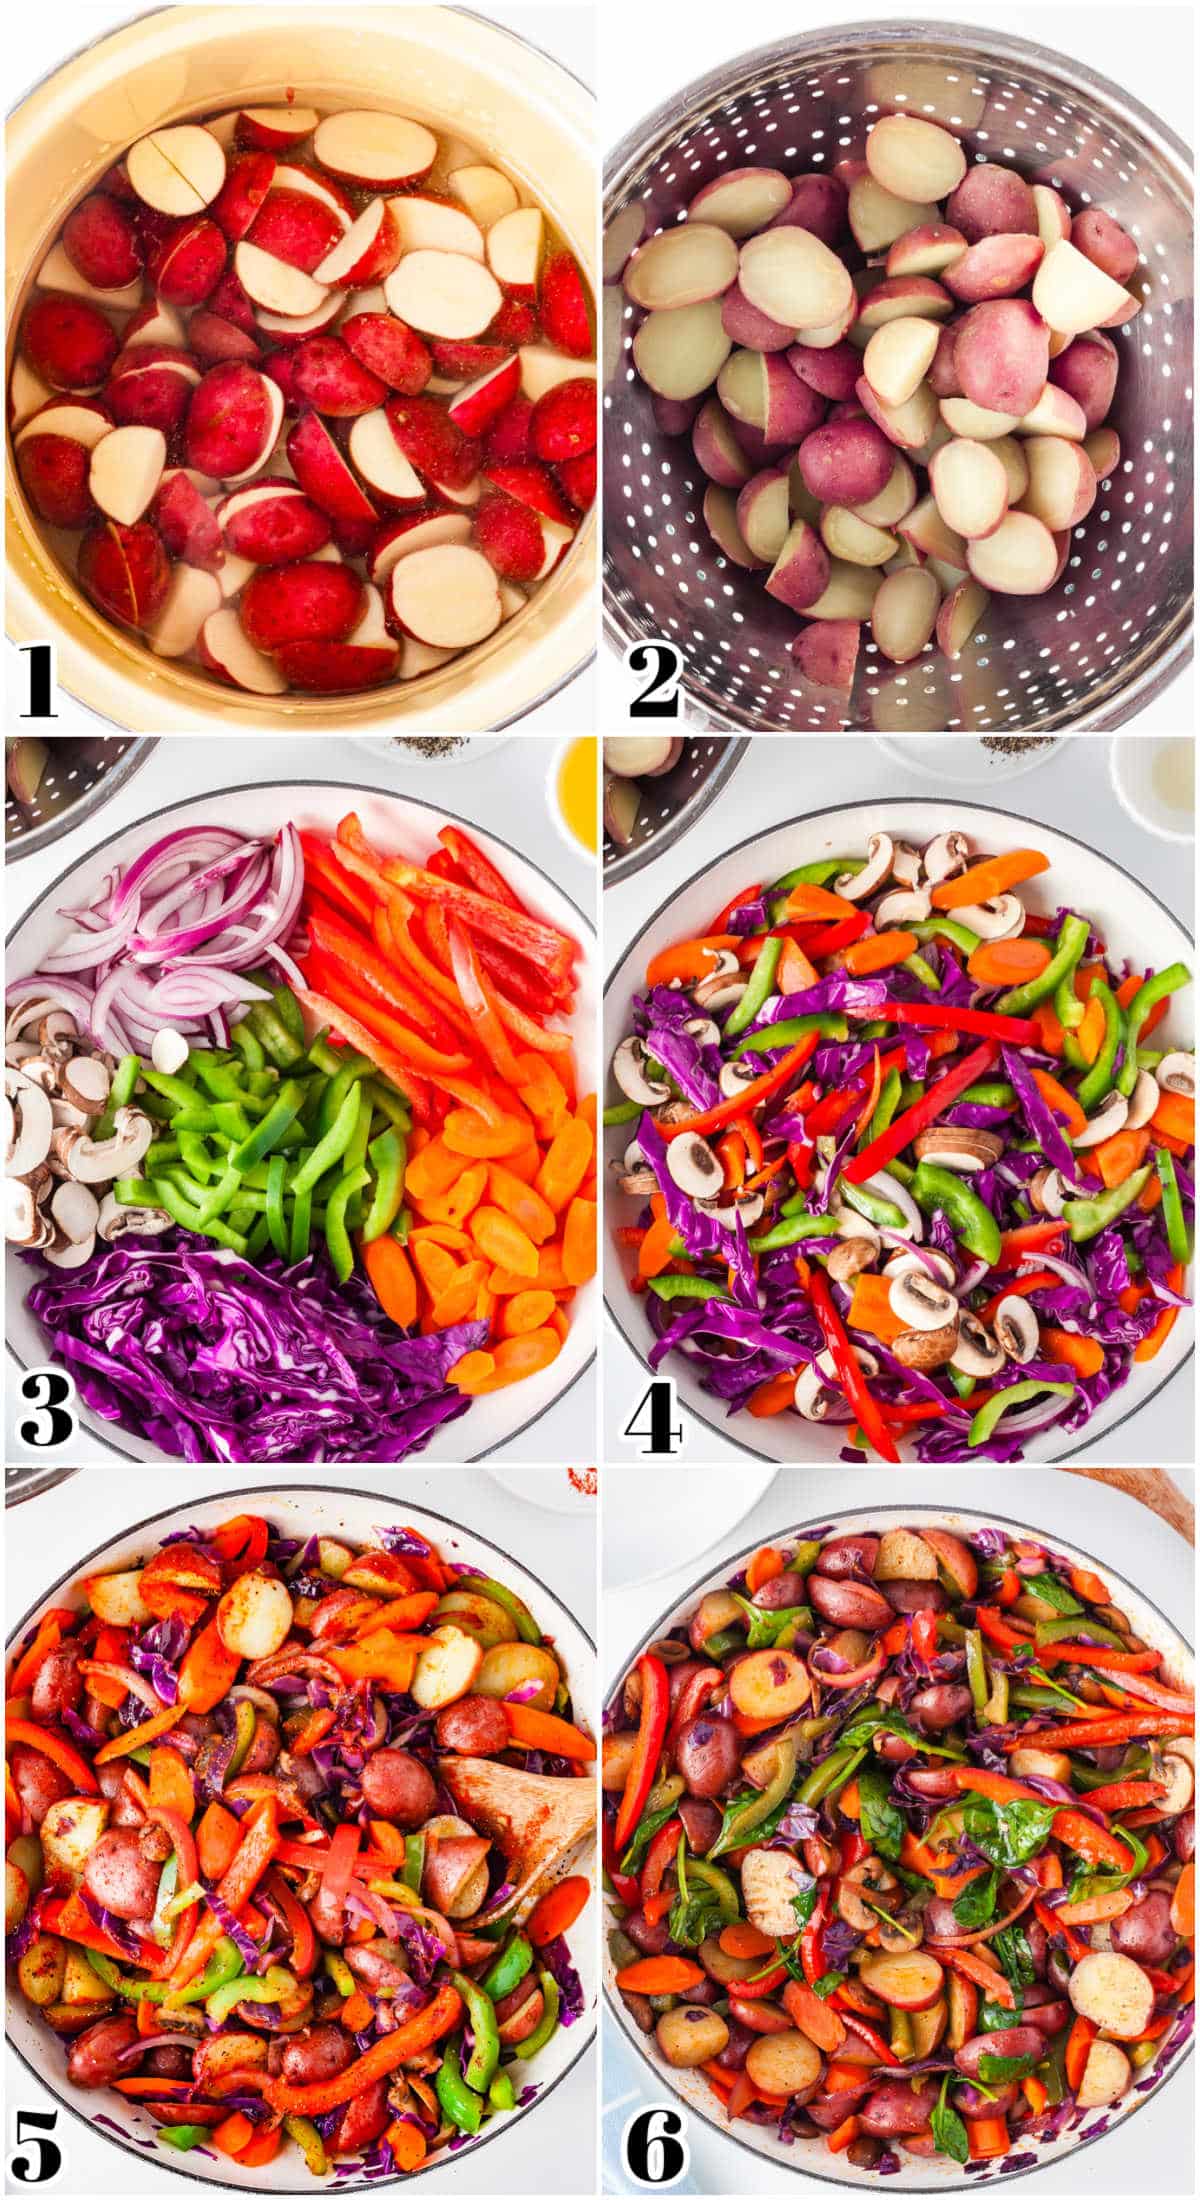 A picture collage showing how to make this recipe from cooking the potatoes to cooking the other veggies.